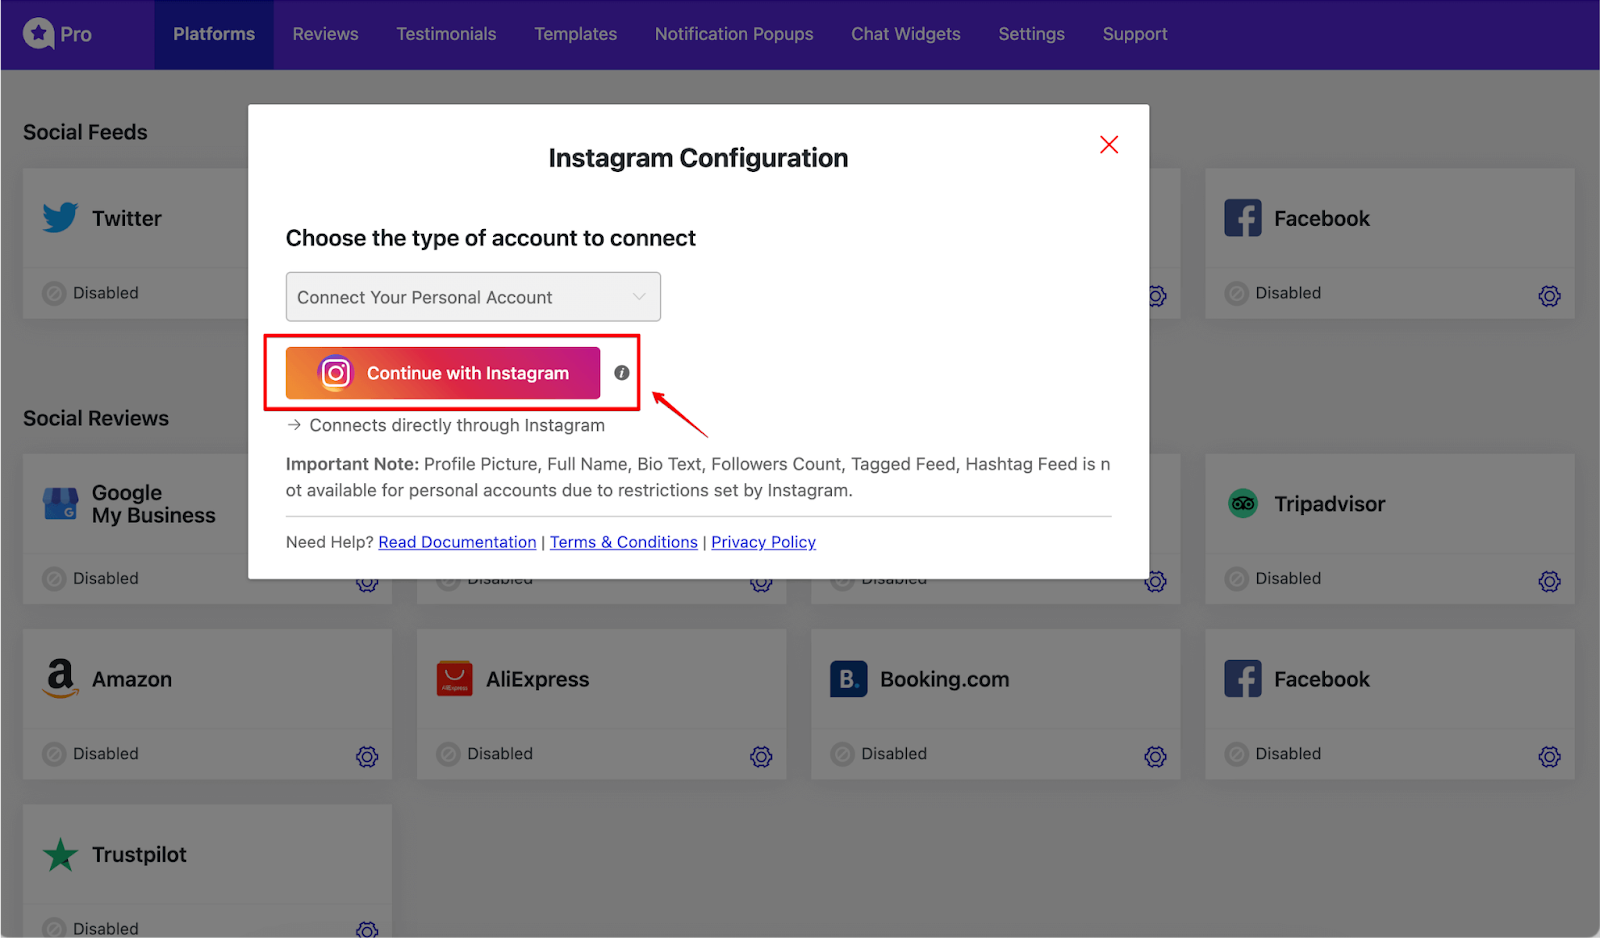 Click Continue with Instagram to connect a personal account. 